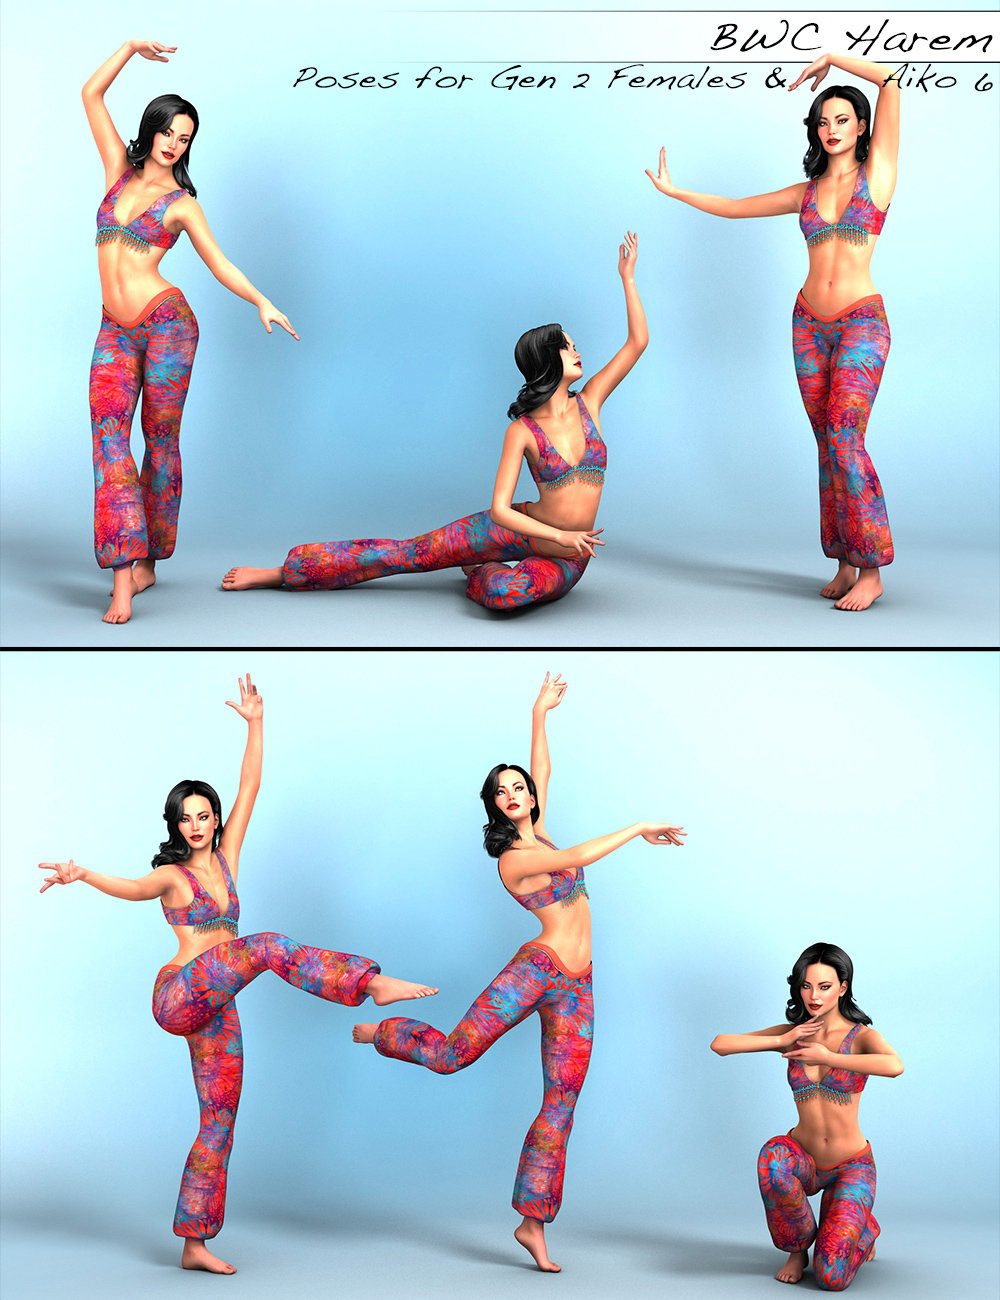 BWC Harem - Poses for Genesis 2 Female(s) and Aiko 6 by: Sedor, 3D Models by Daz 3D